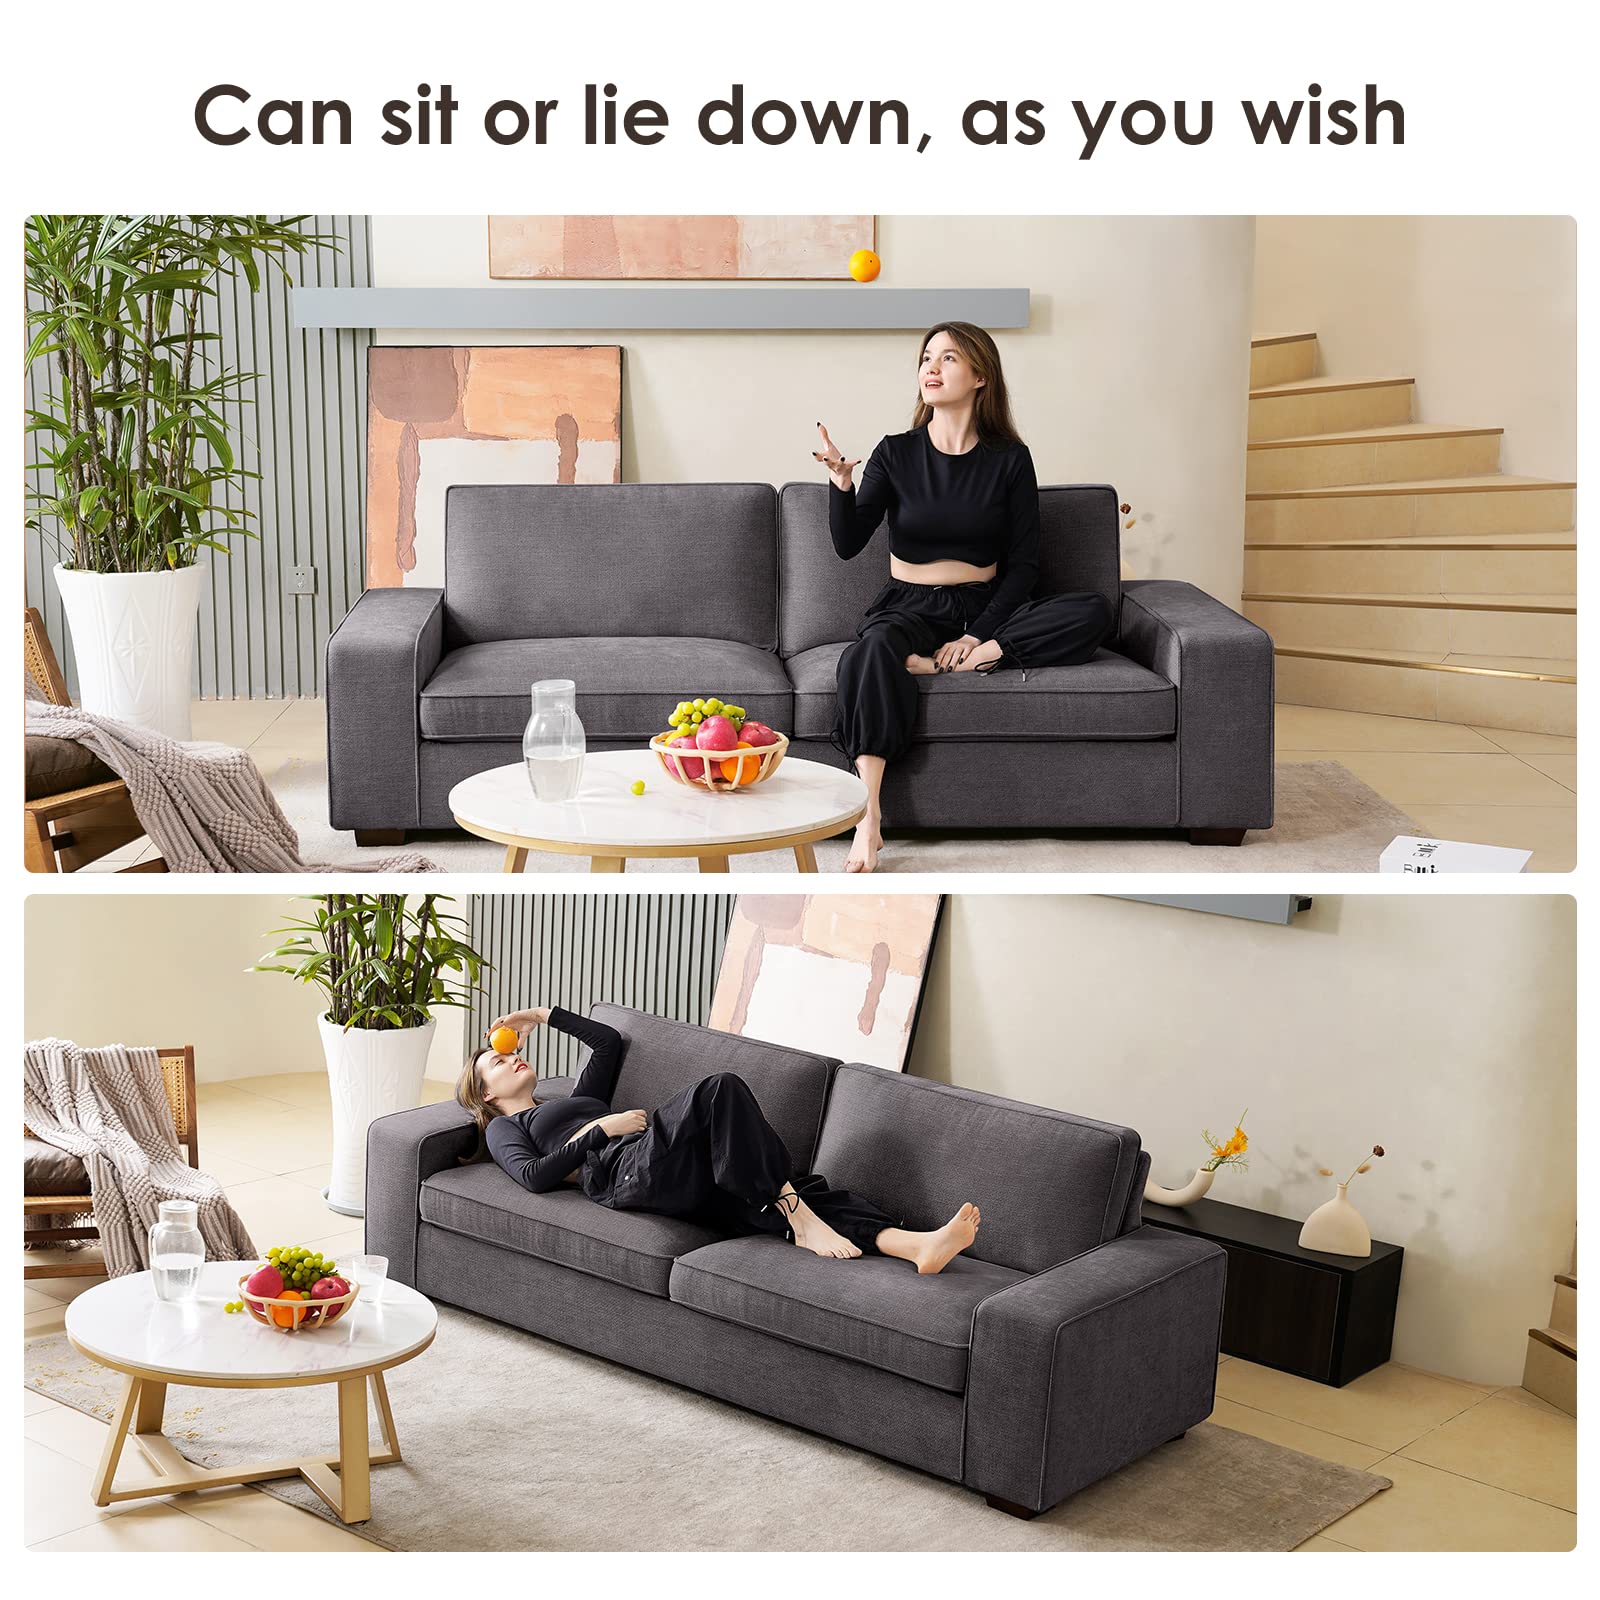 19 Couches That Ensure You'll Never Leave Your Home Again